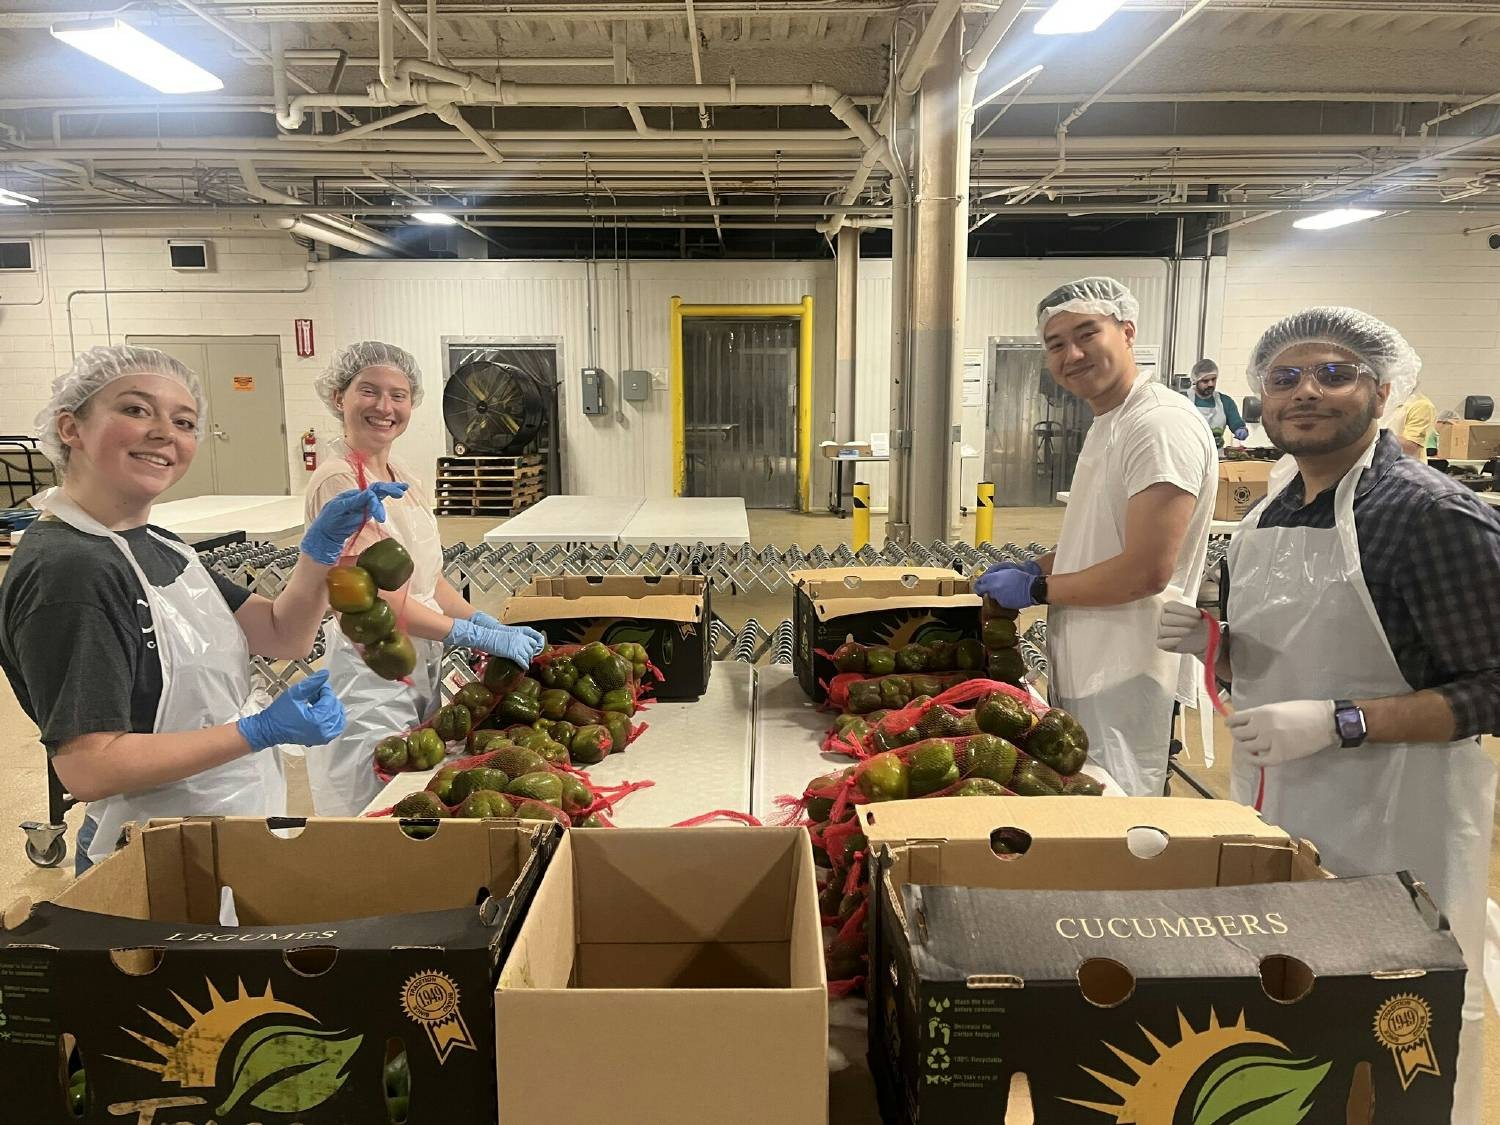 Chicago Food packing event